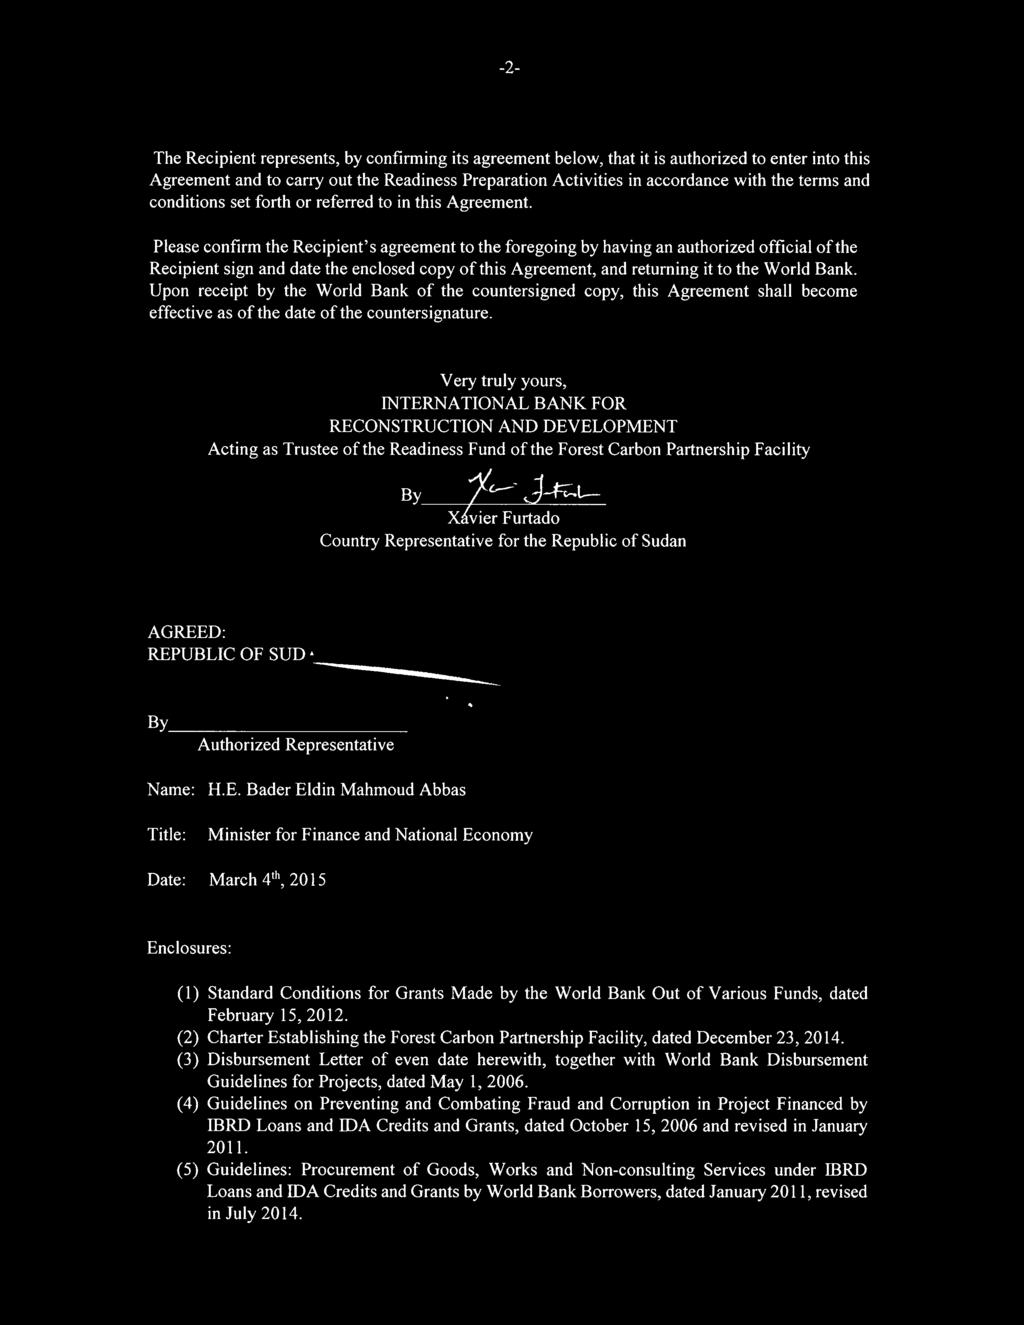 Please confirm the Recipient's agreement to the foregoing by having an authorized official of the Recipient sign and date the enclosed copy of this Agreement, and returning it to the World Bank.